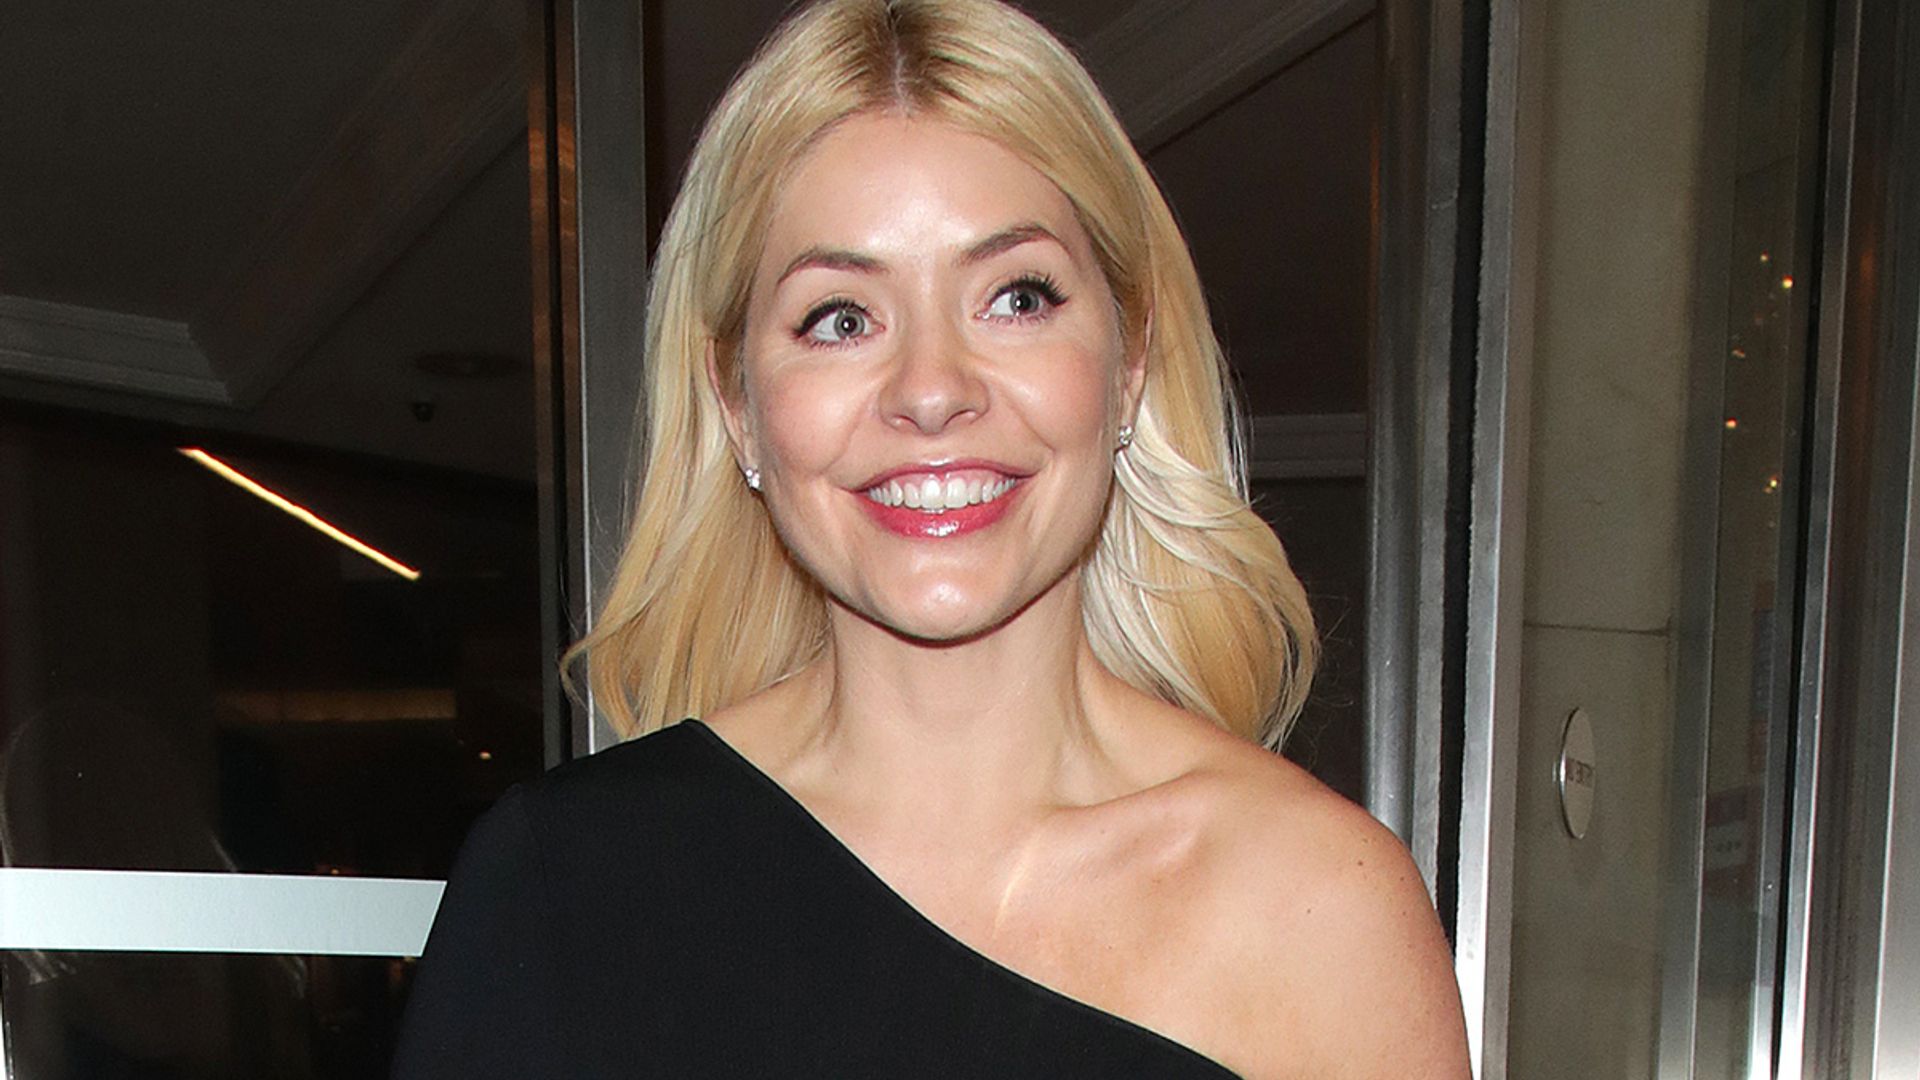 Holly Willoughby amazes in black mini dress with surprising detailing